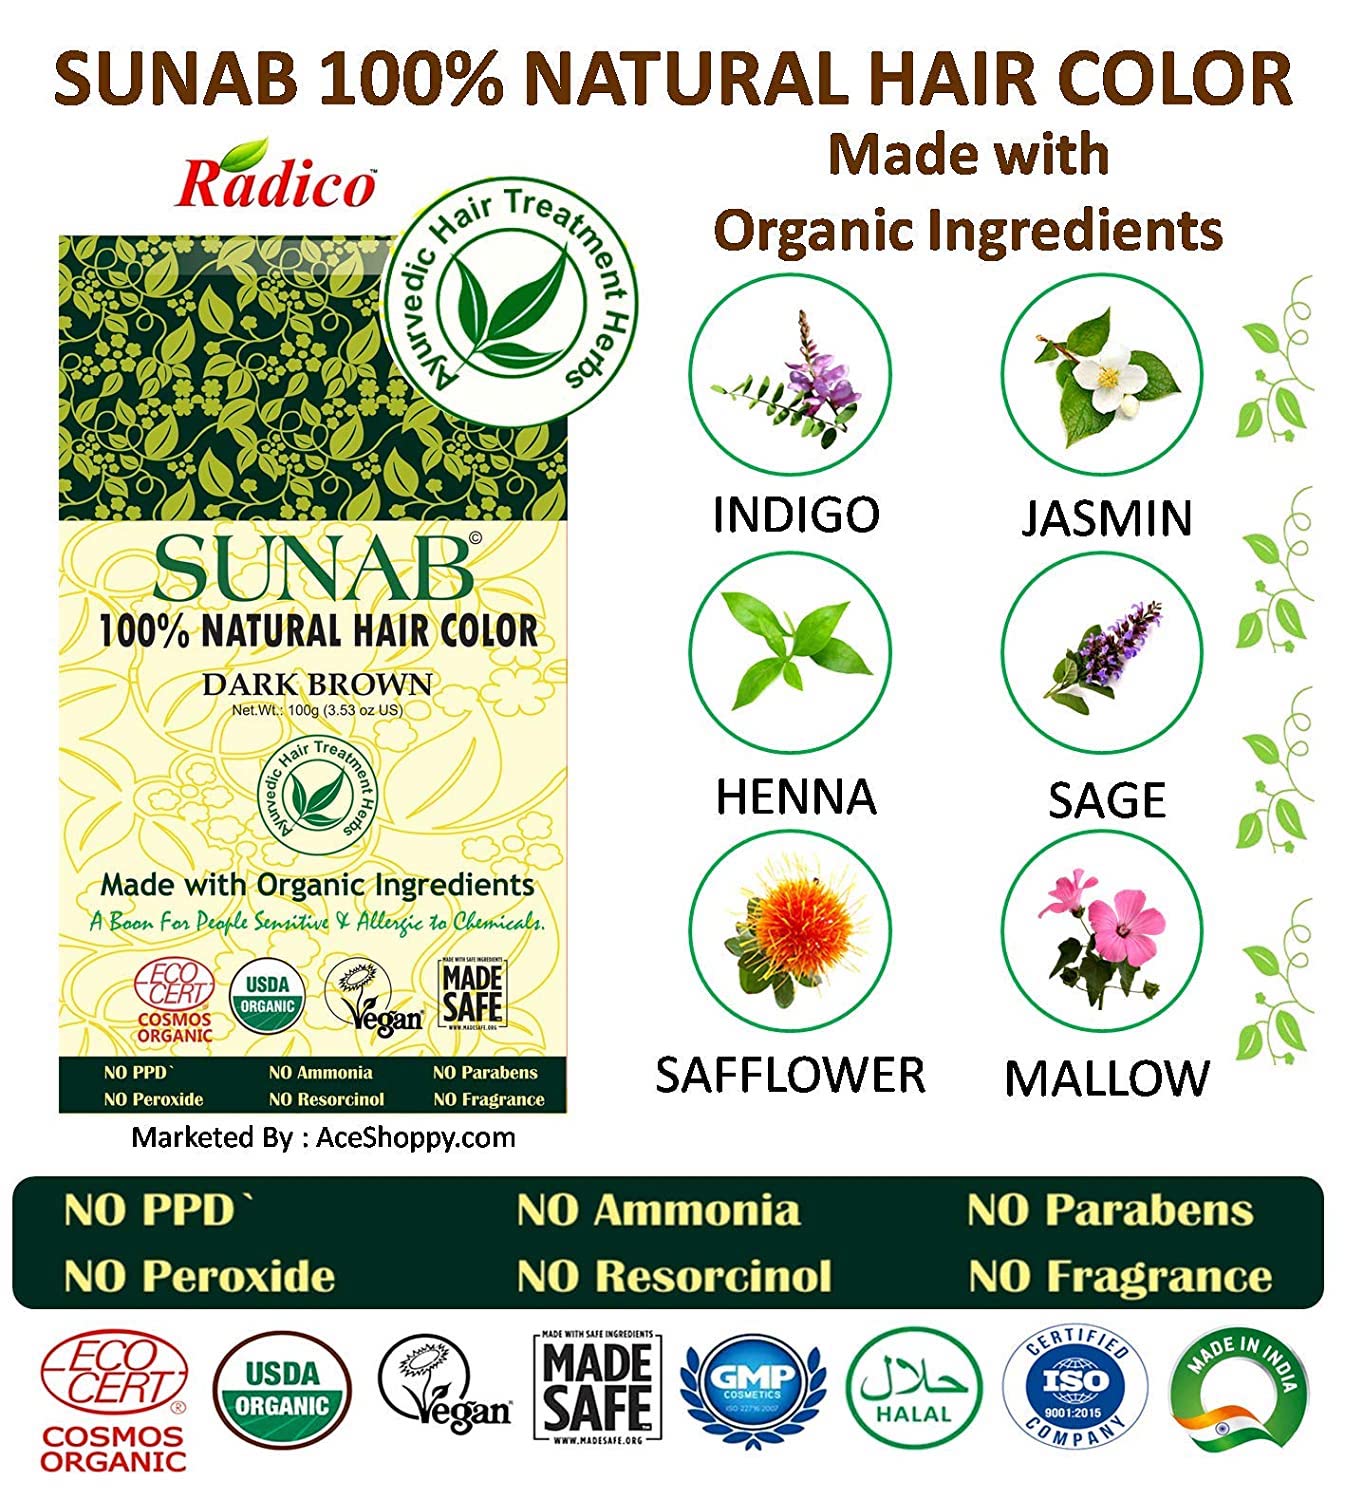 Radico Colour Me Organic Hair Color Sunab Packaging MADE SAFE